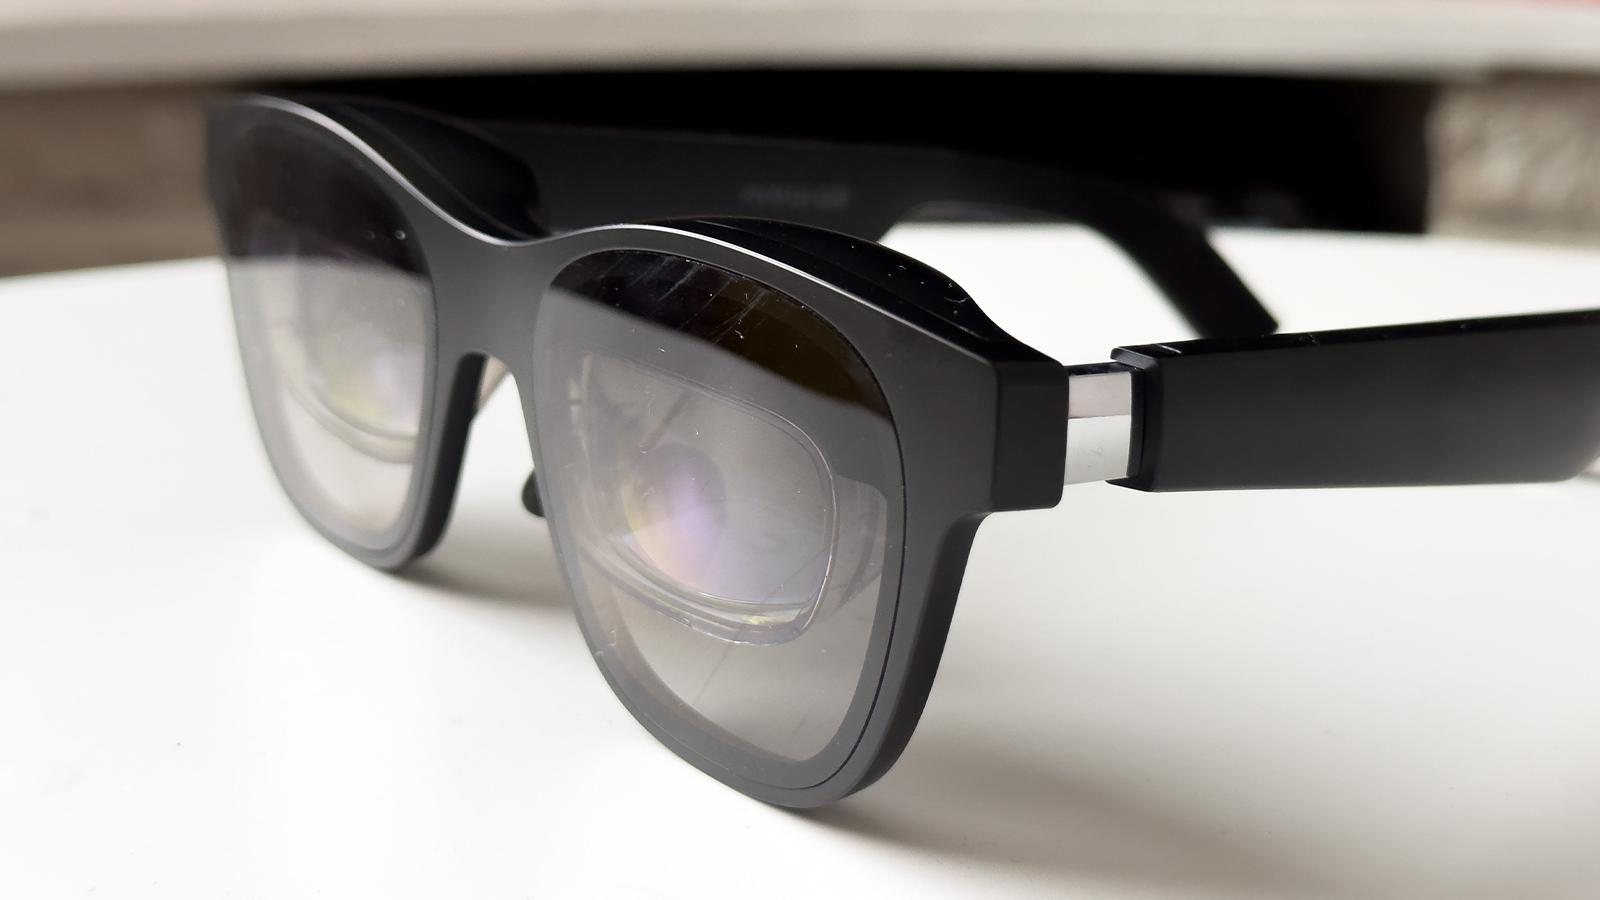 The Nreal Air AR glasses are coming to the UK this spring